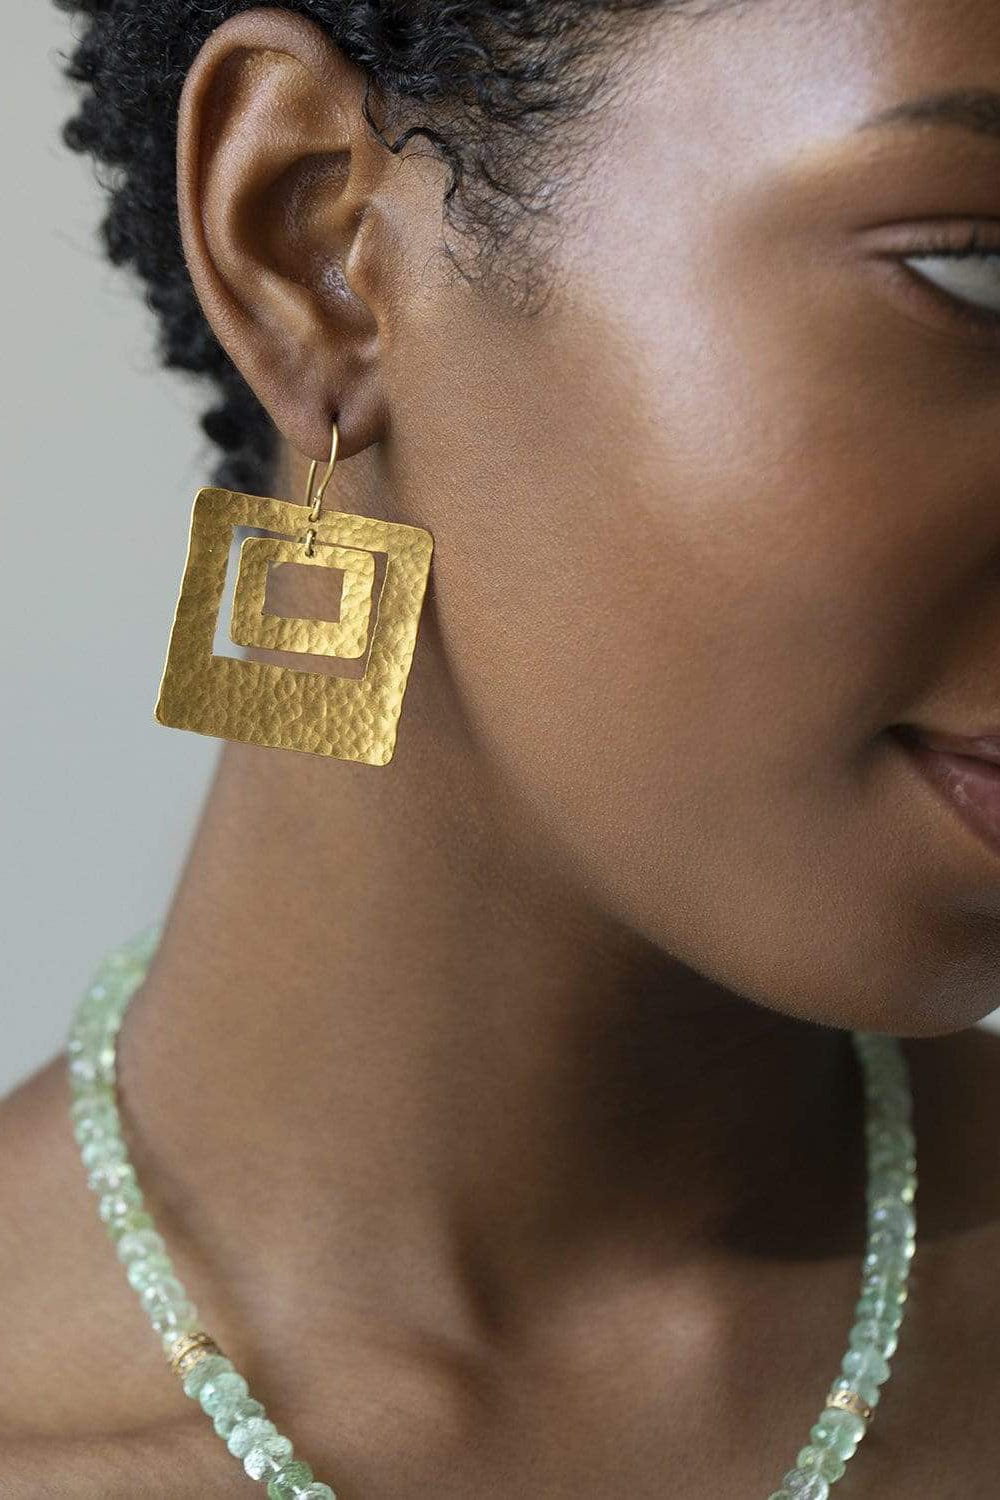 BOAZ KASHI-Double Square Hammered Gold Earrings-YELLOW GOLD